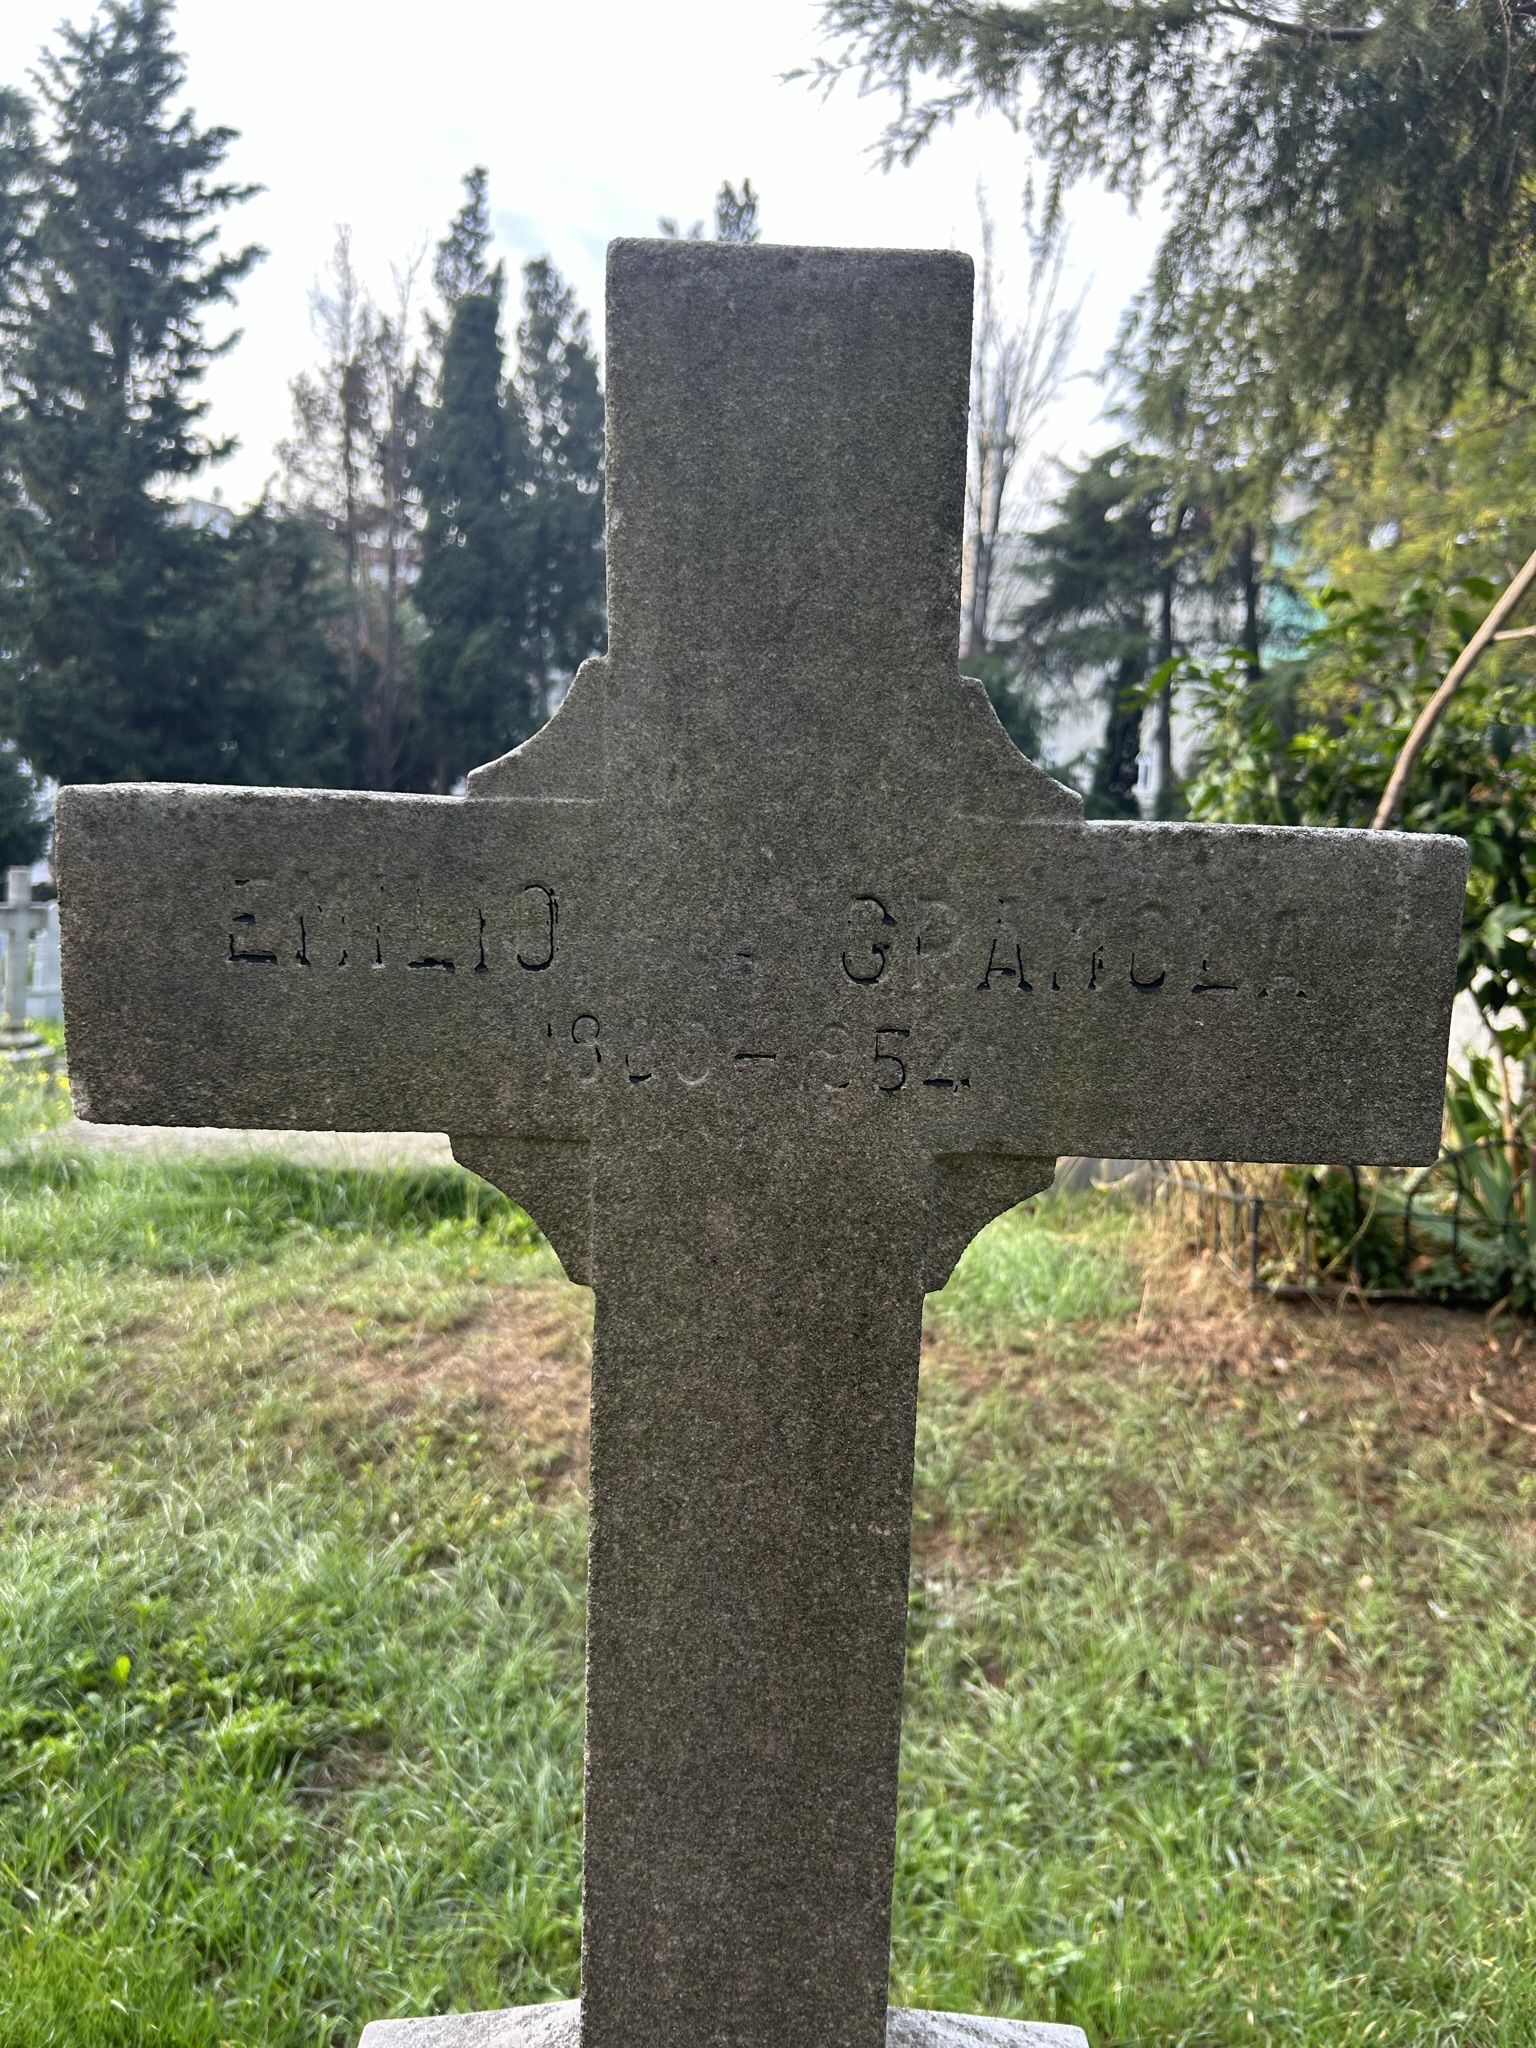 Inscription from the tombstone of Emilio and Maria Granola, Catholic cemetery in Feriköy